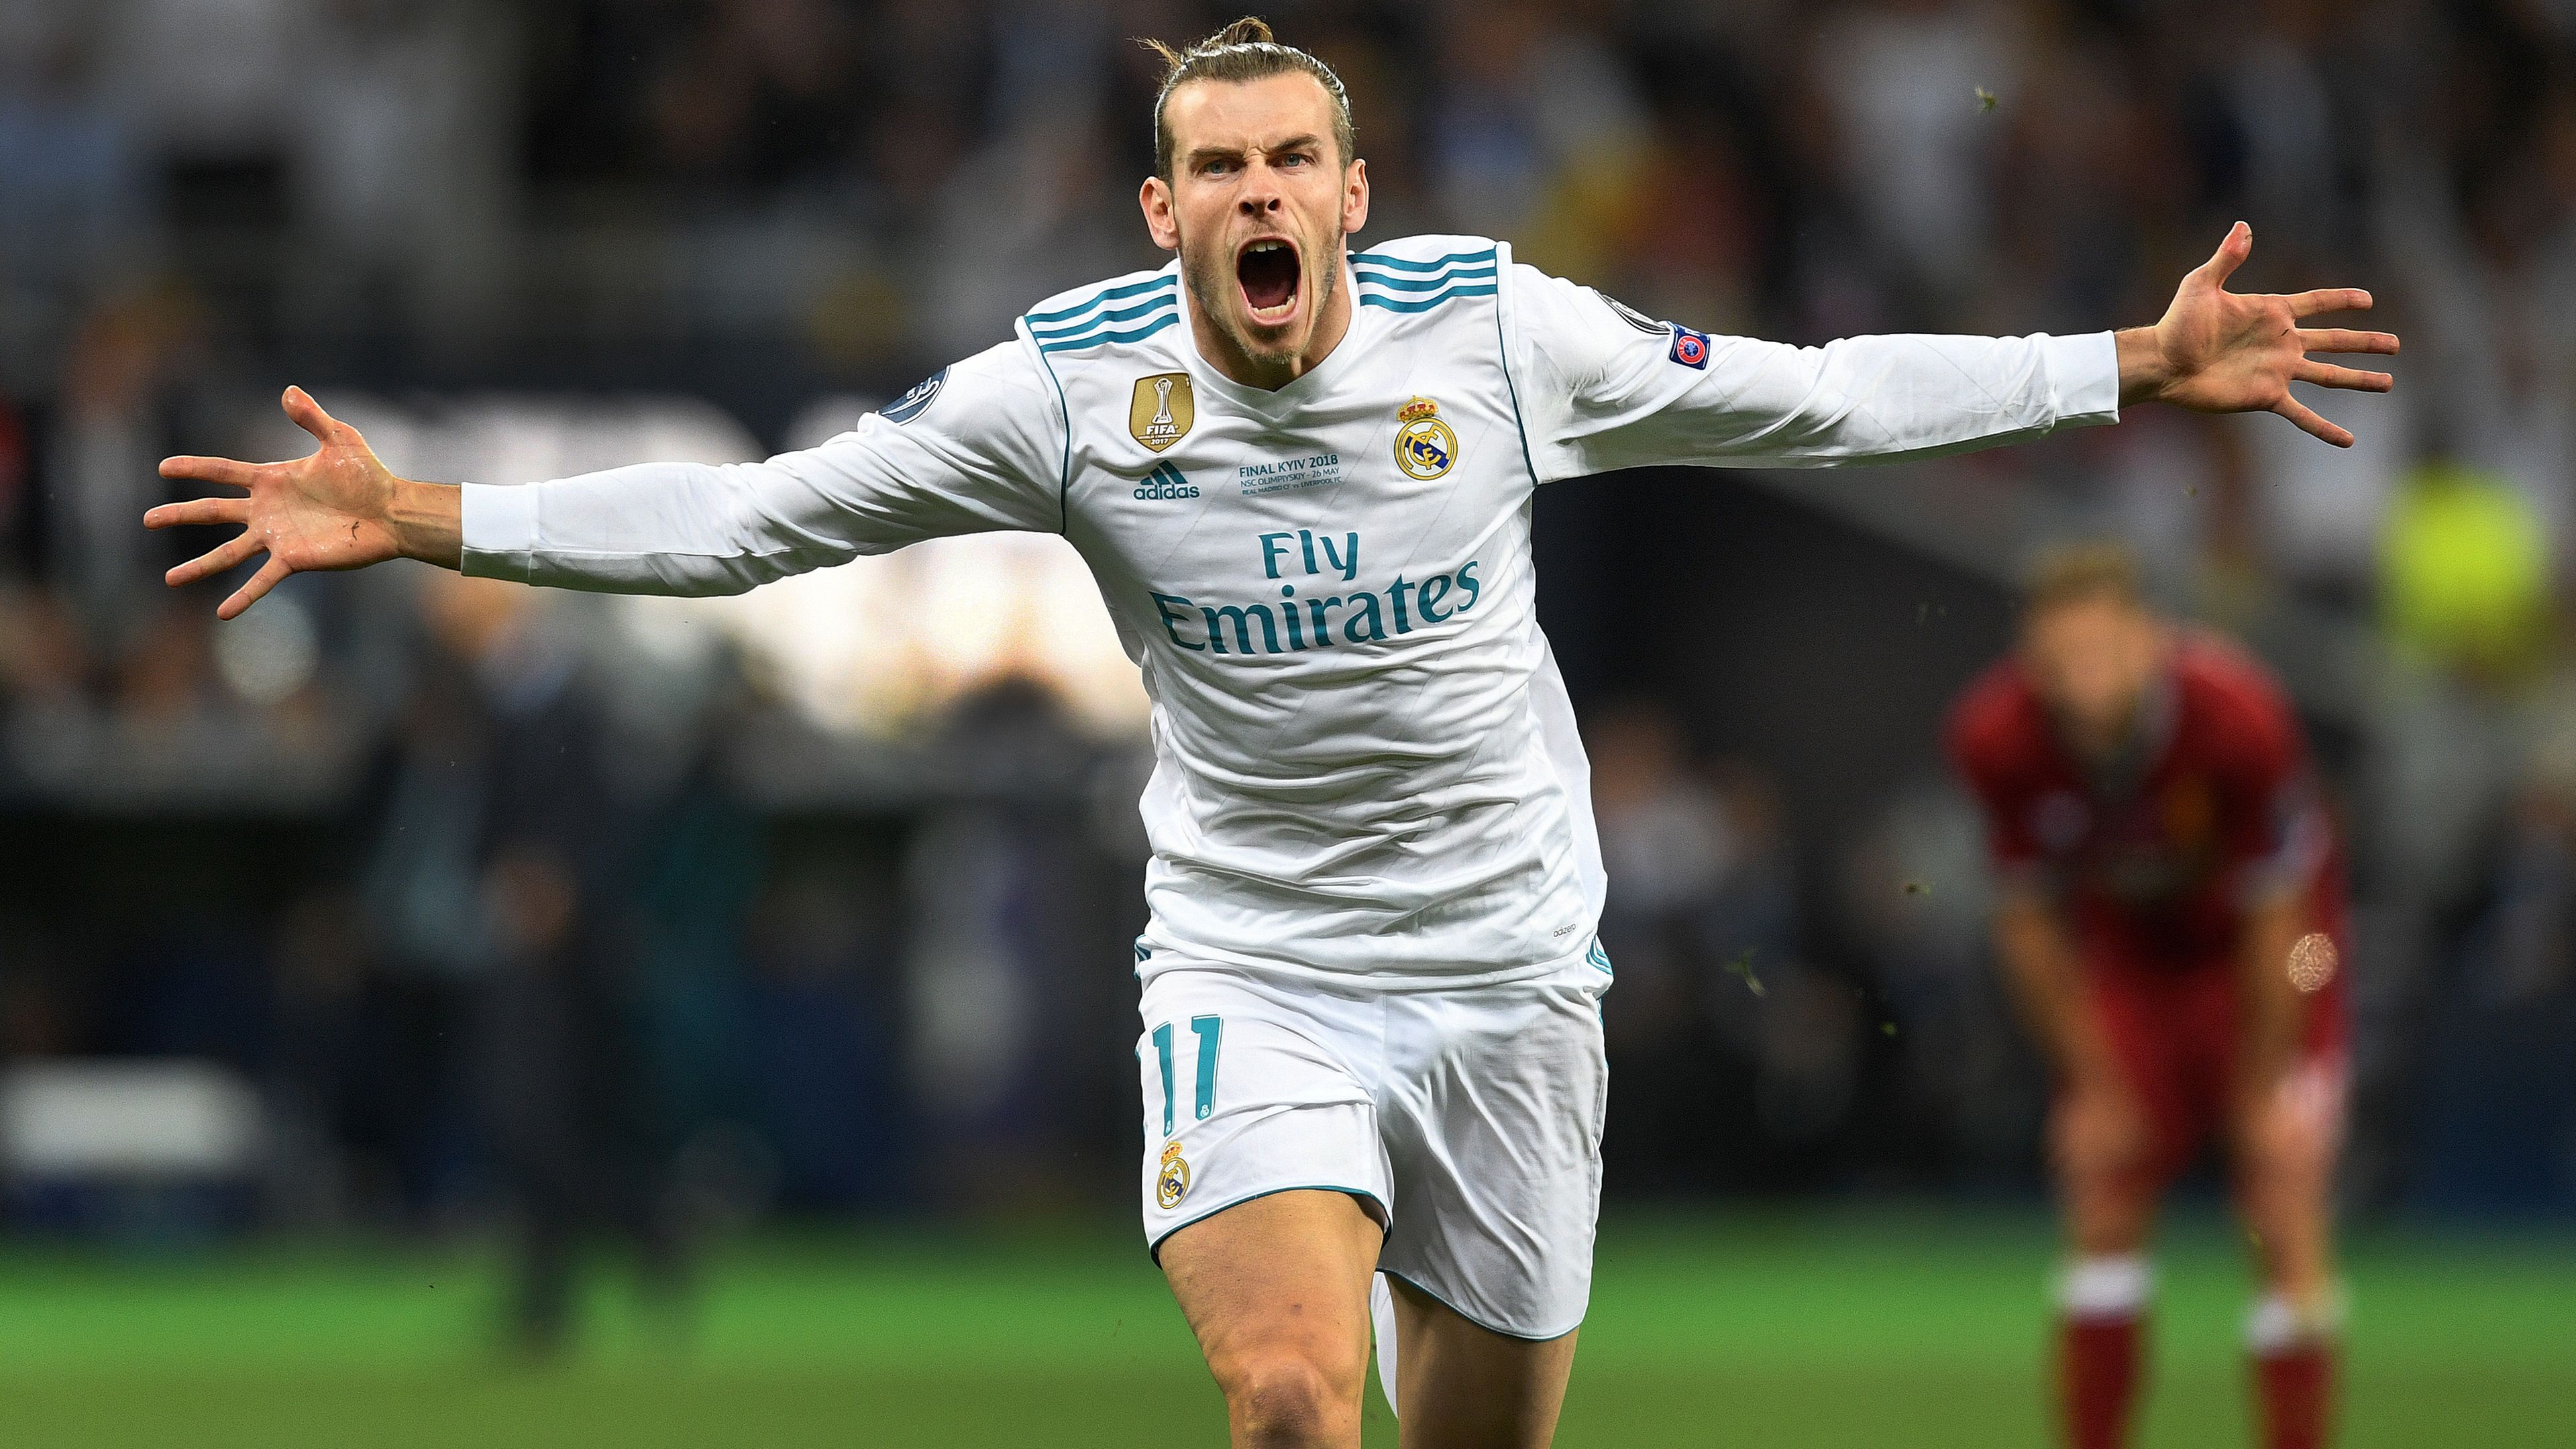 Gareth Bale of Real Madrid celebrates scoring in the 2018 Champions League final.